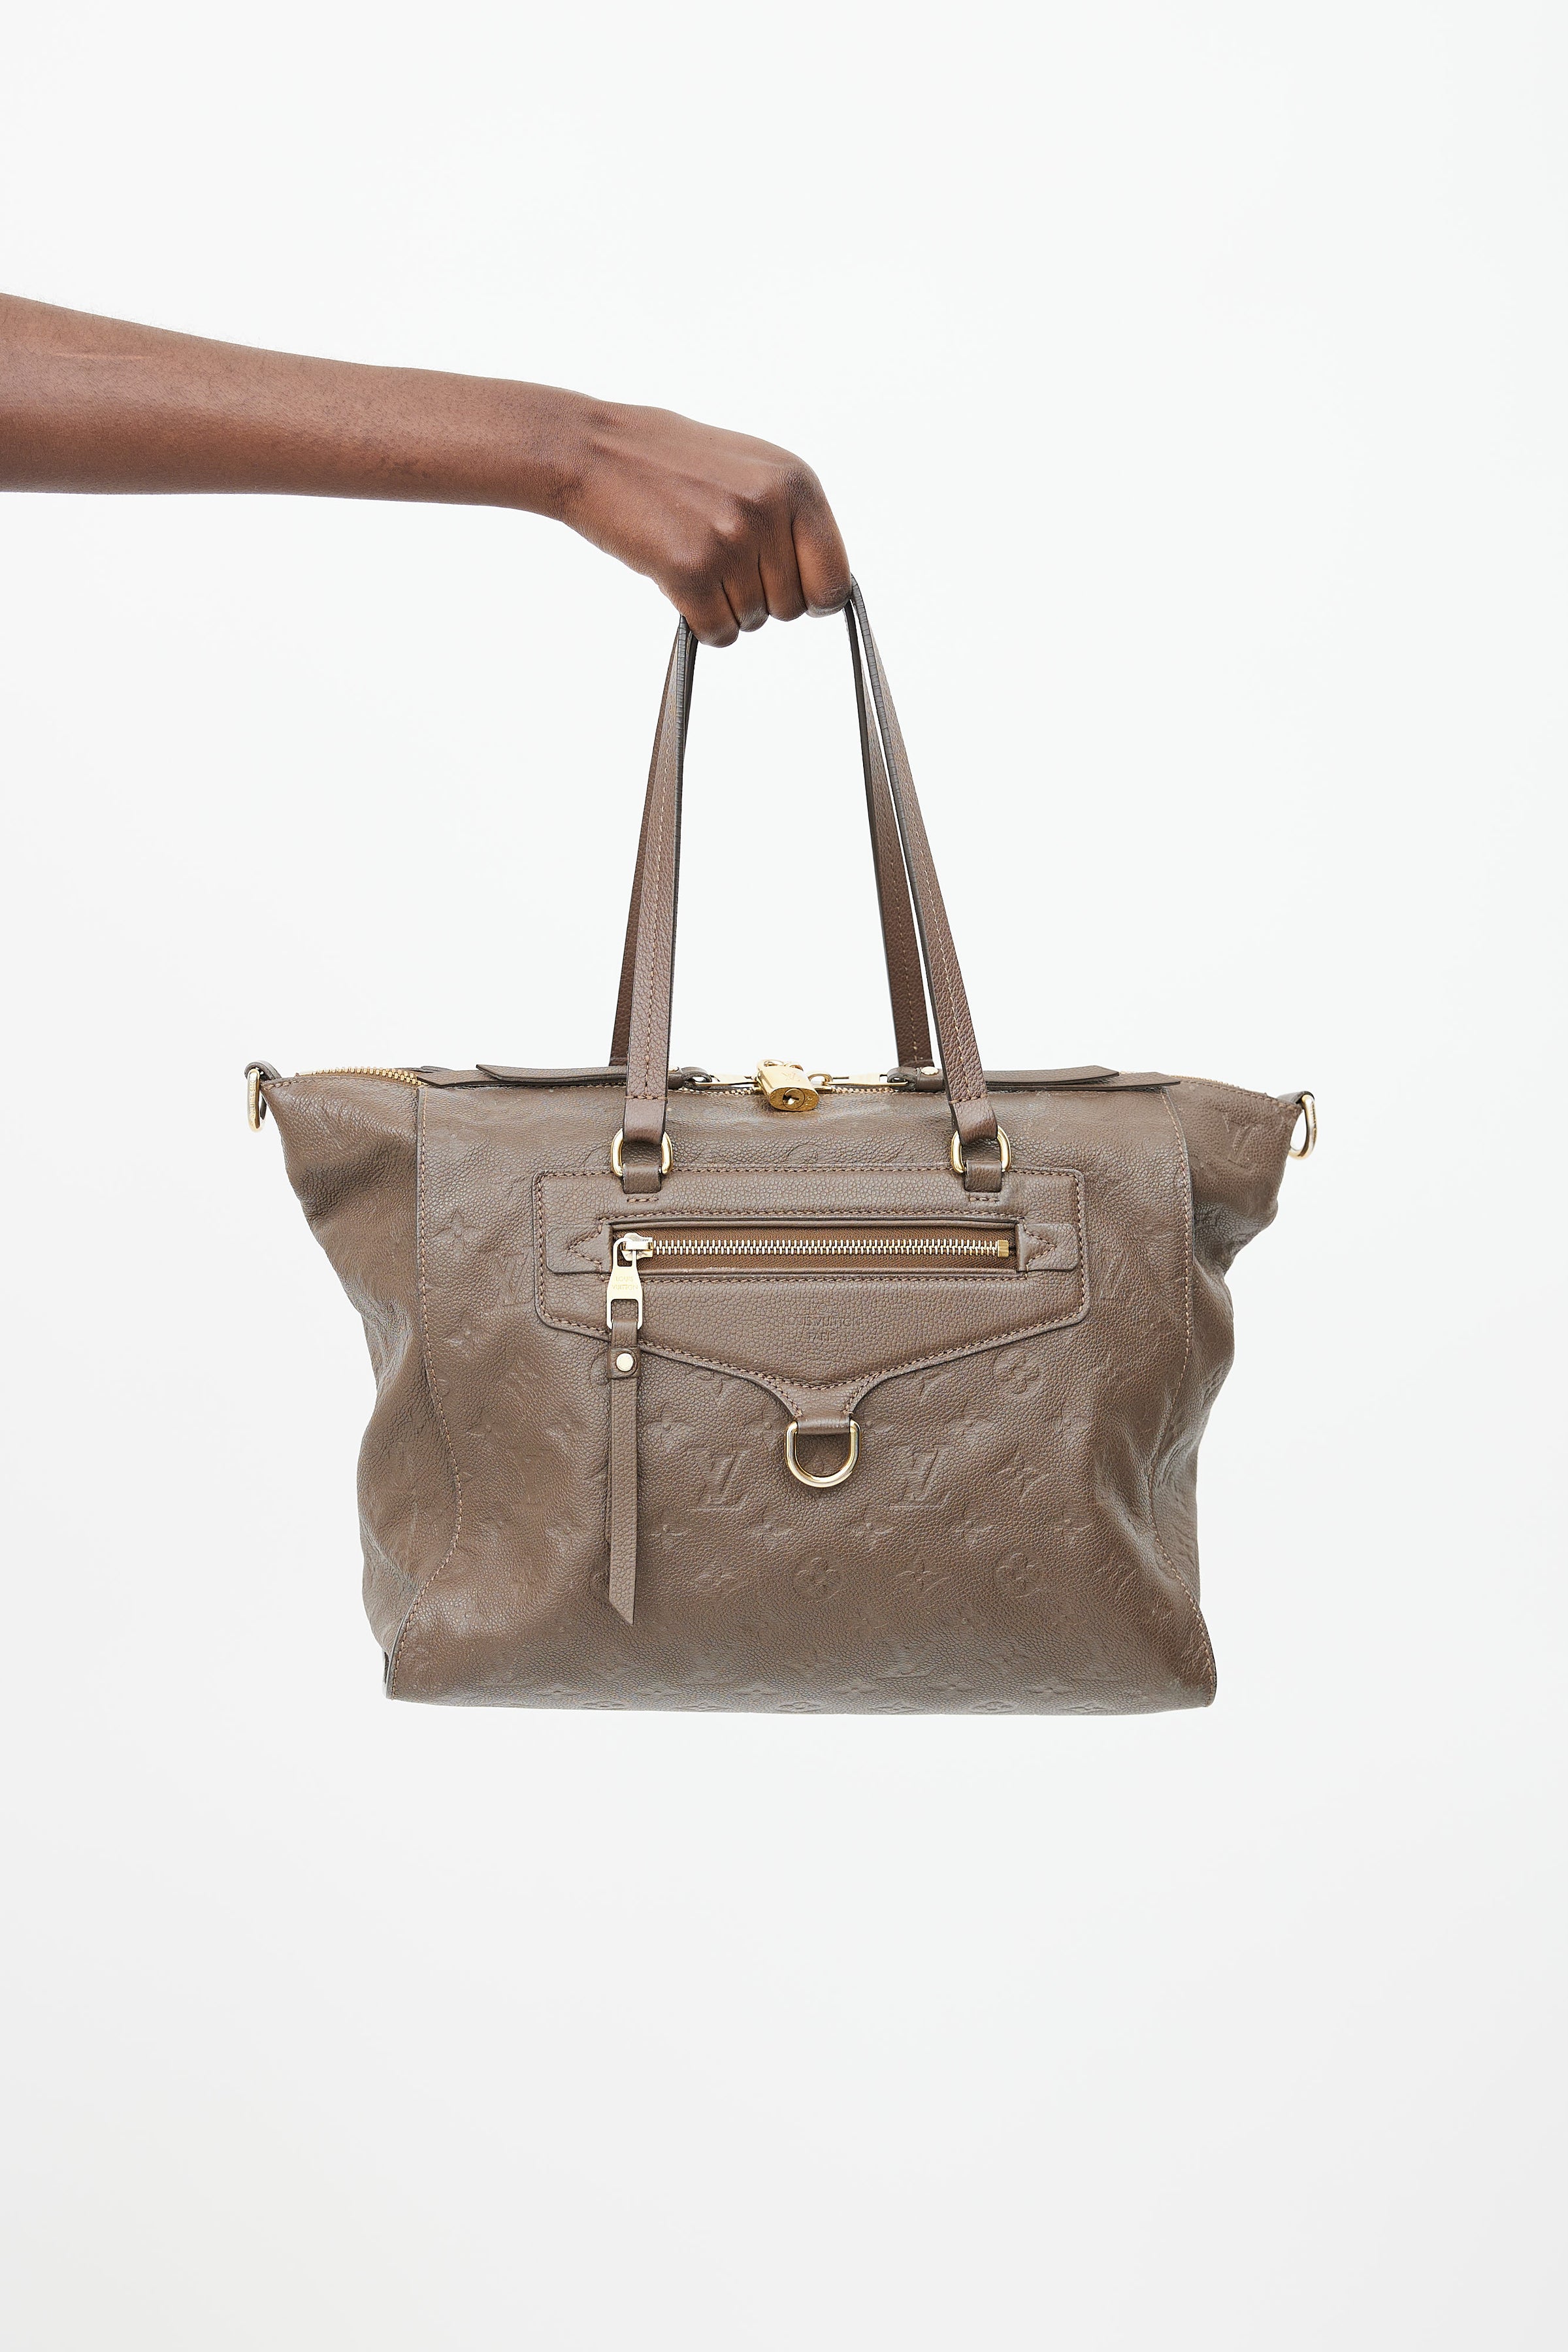 Pre-Owned Louis Vuitton Lumineuse Brown PM Tote 